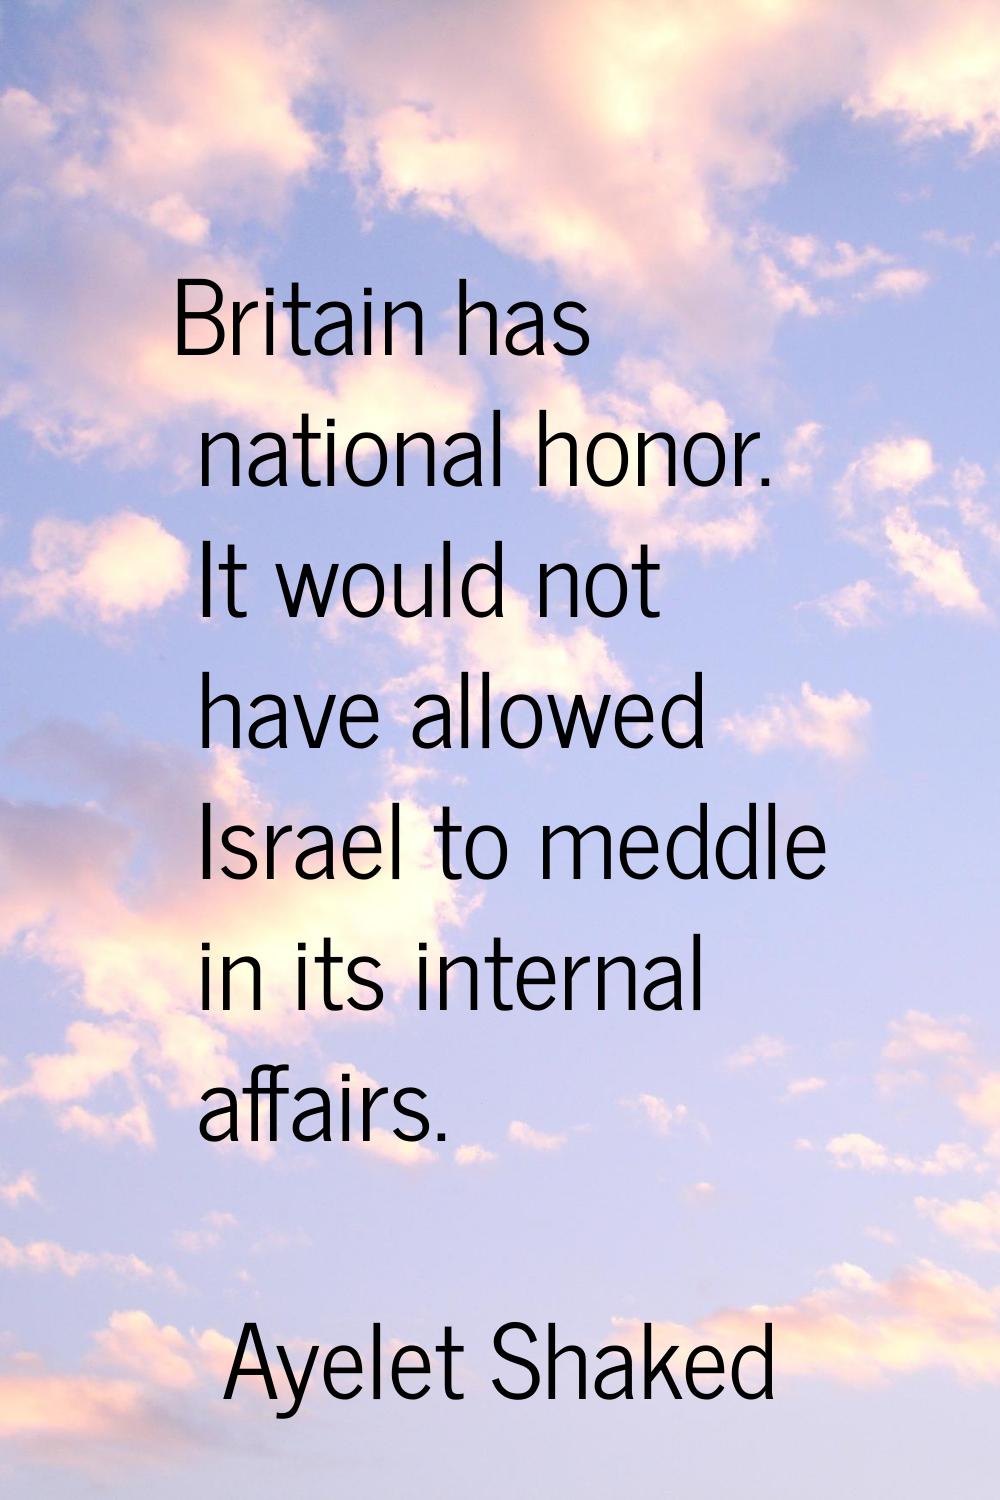 Britain has national honor. It would not have allowed Israel to meddle in its internal affairs.